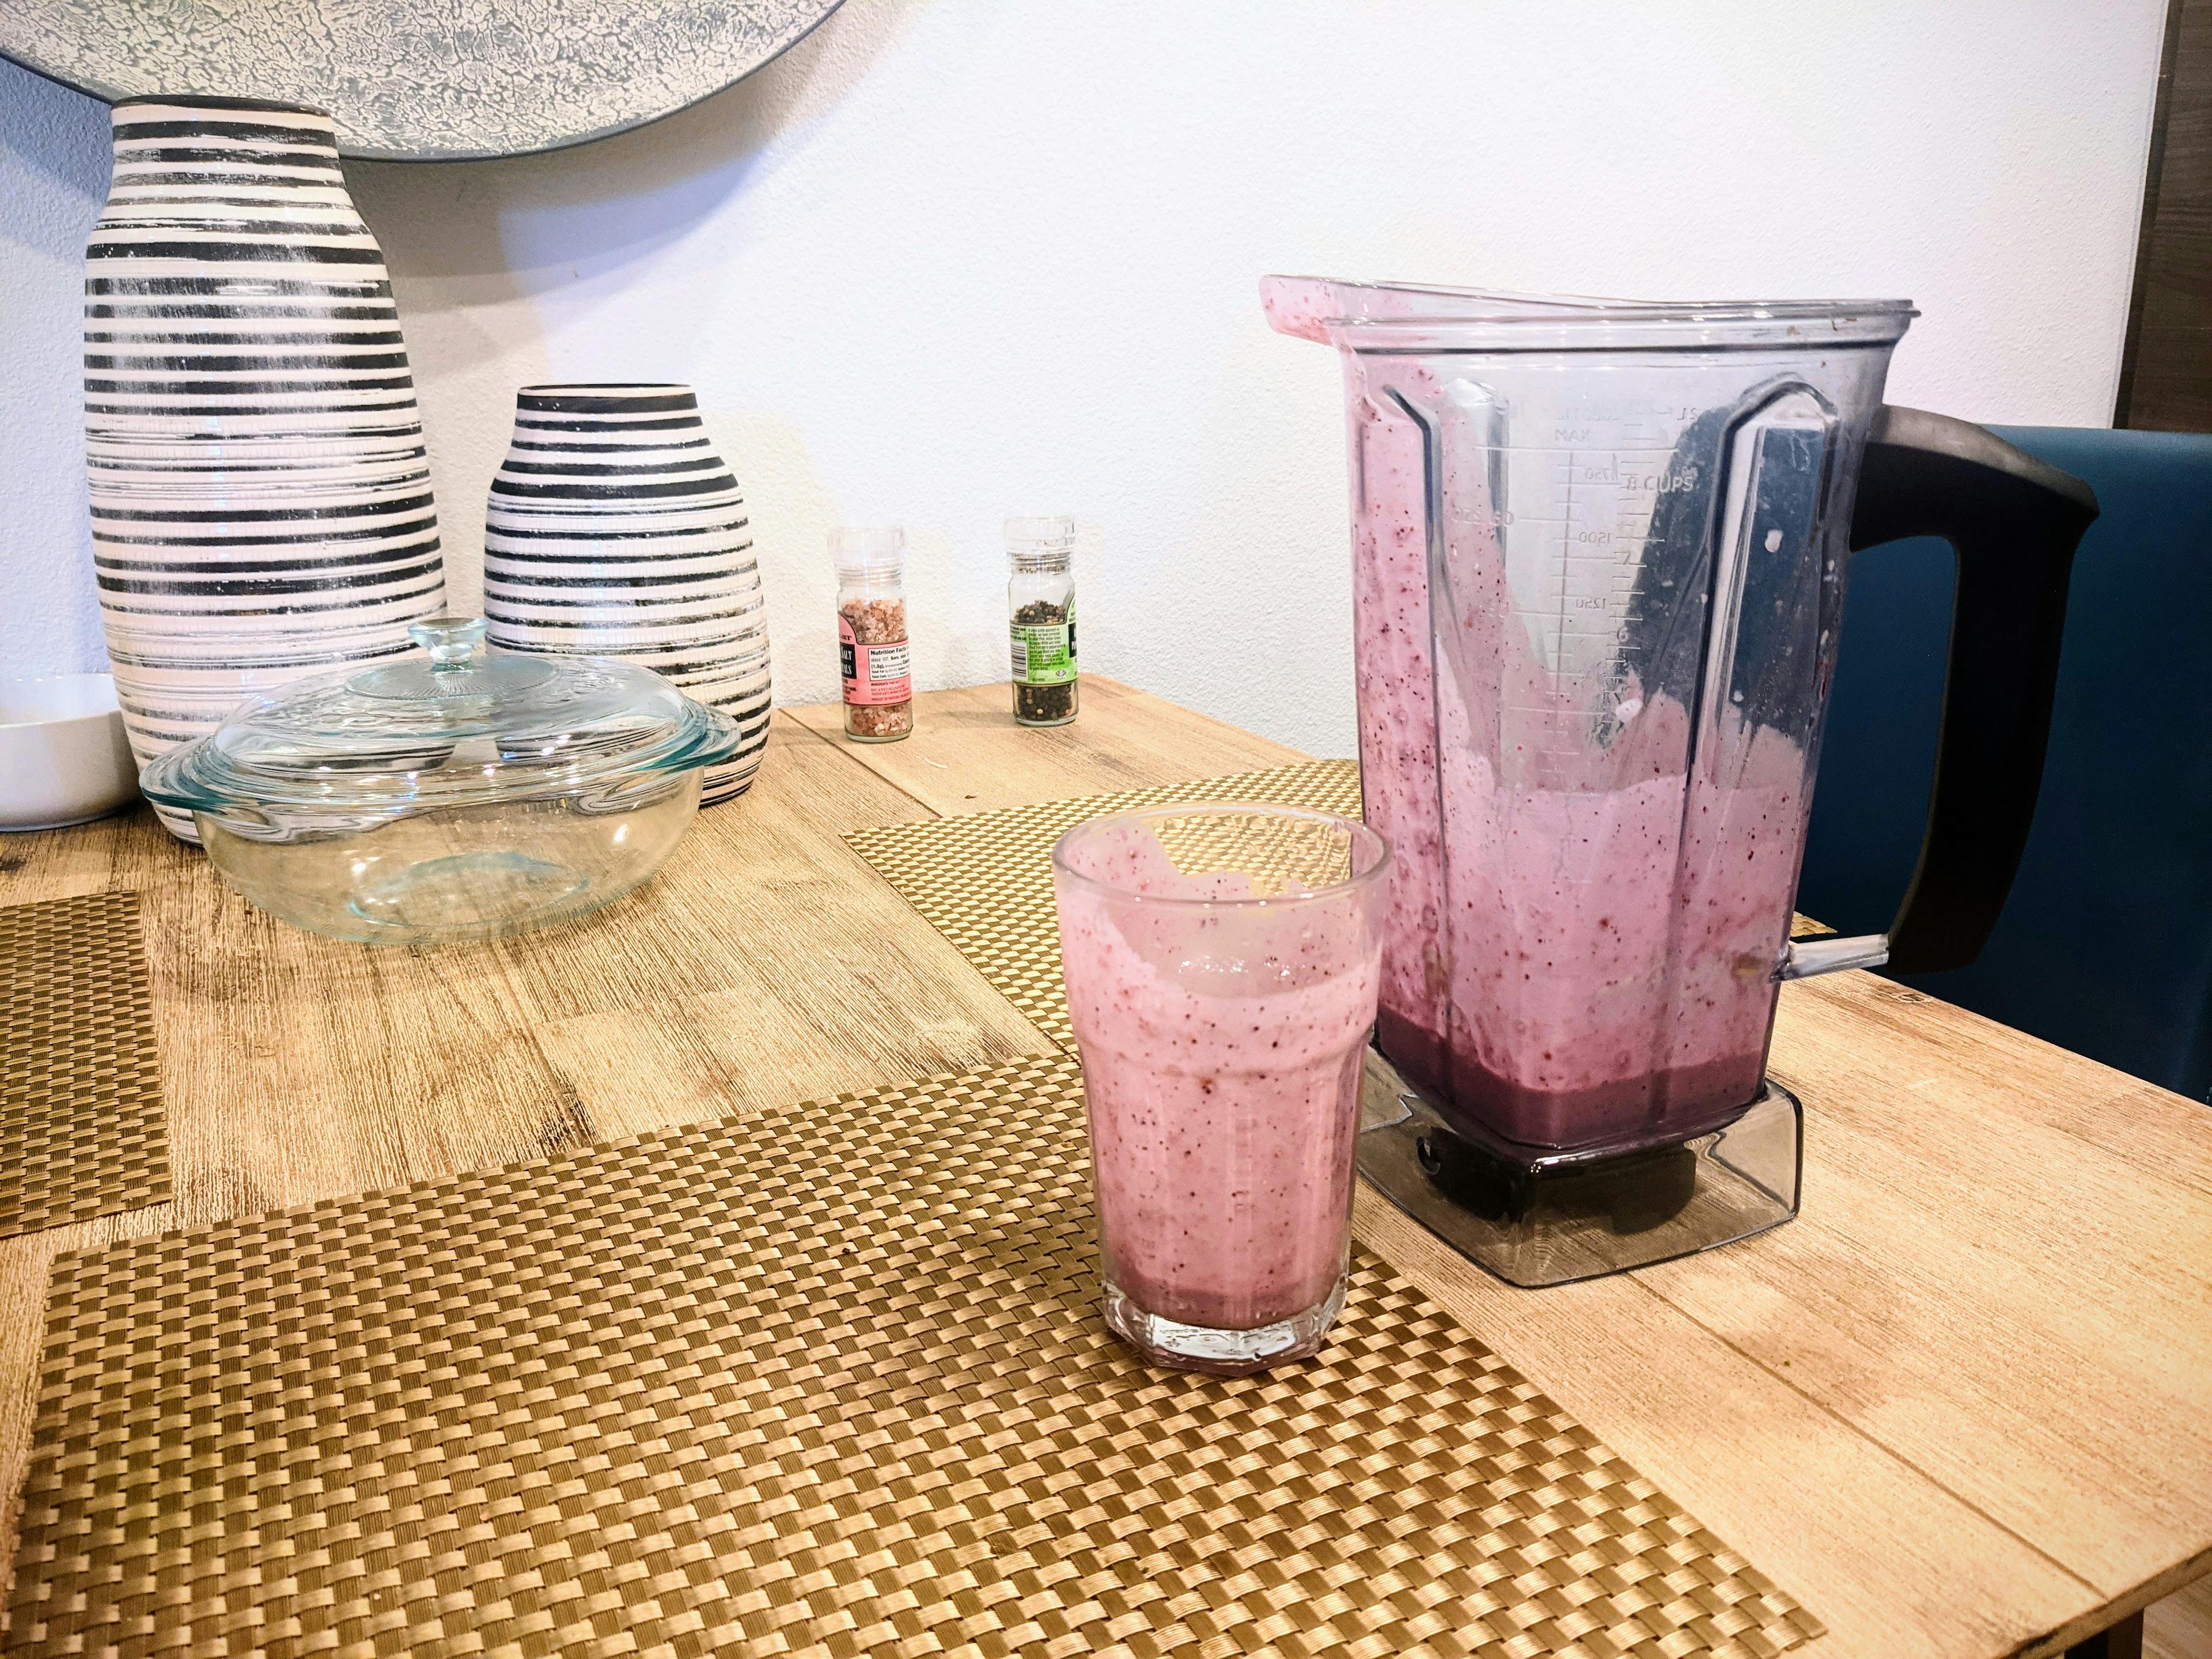 An image of the completed smoothie